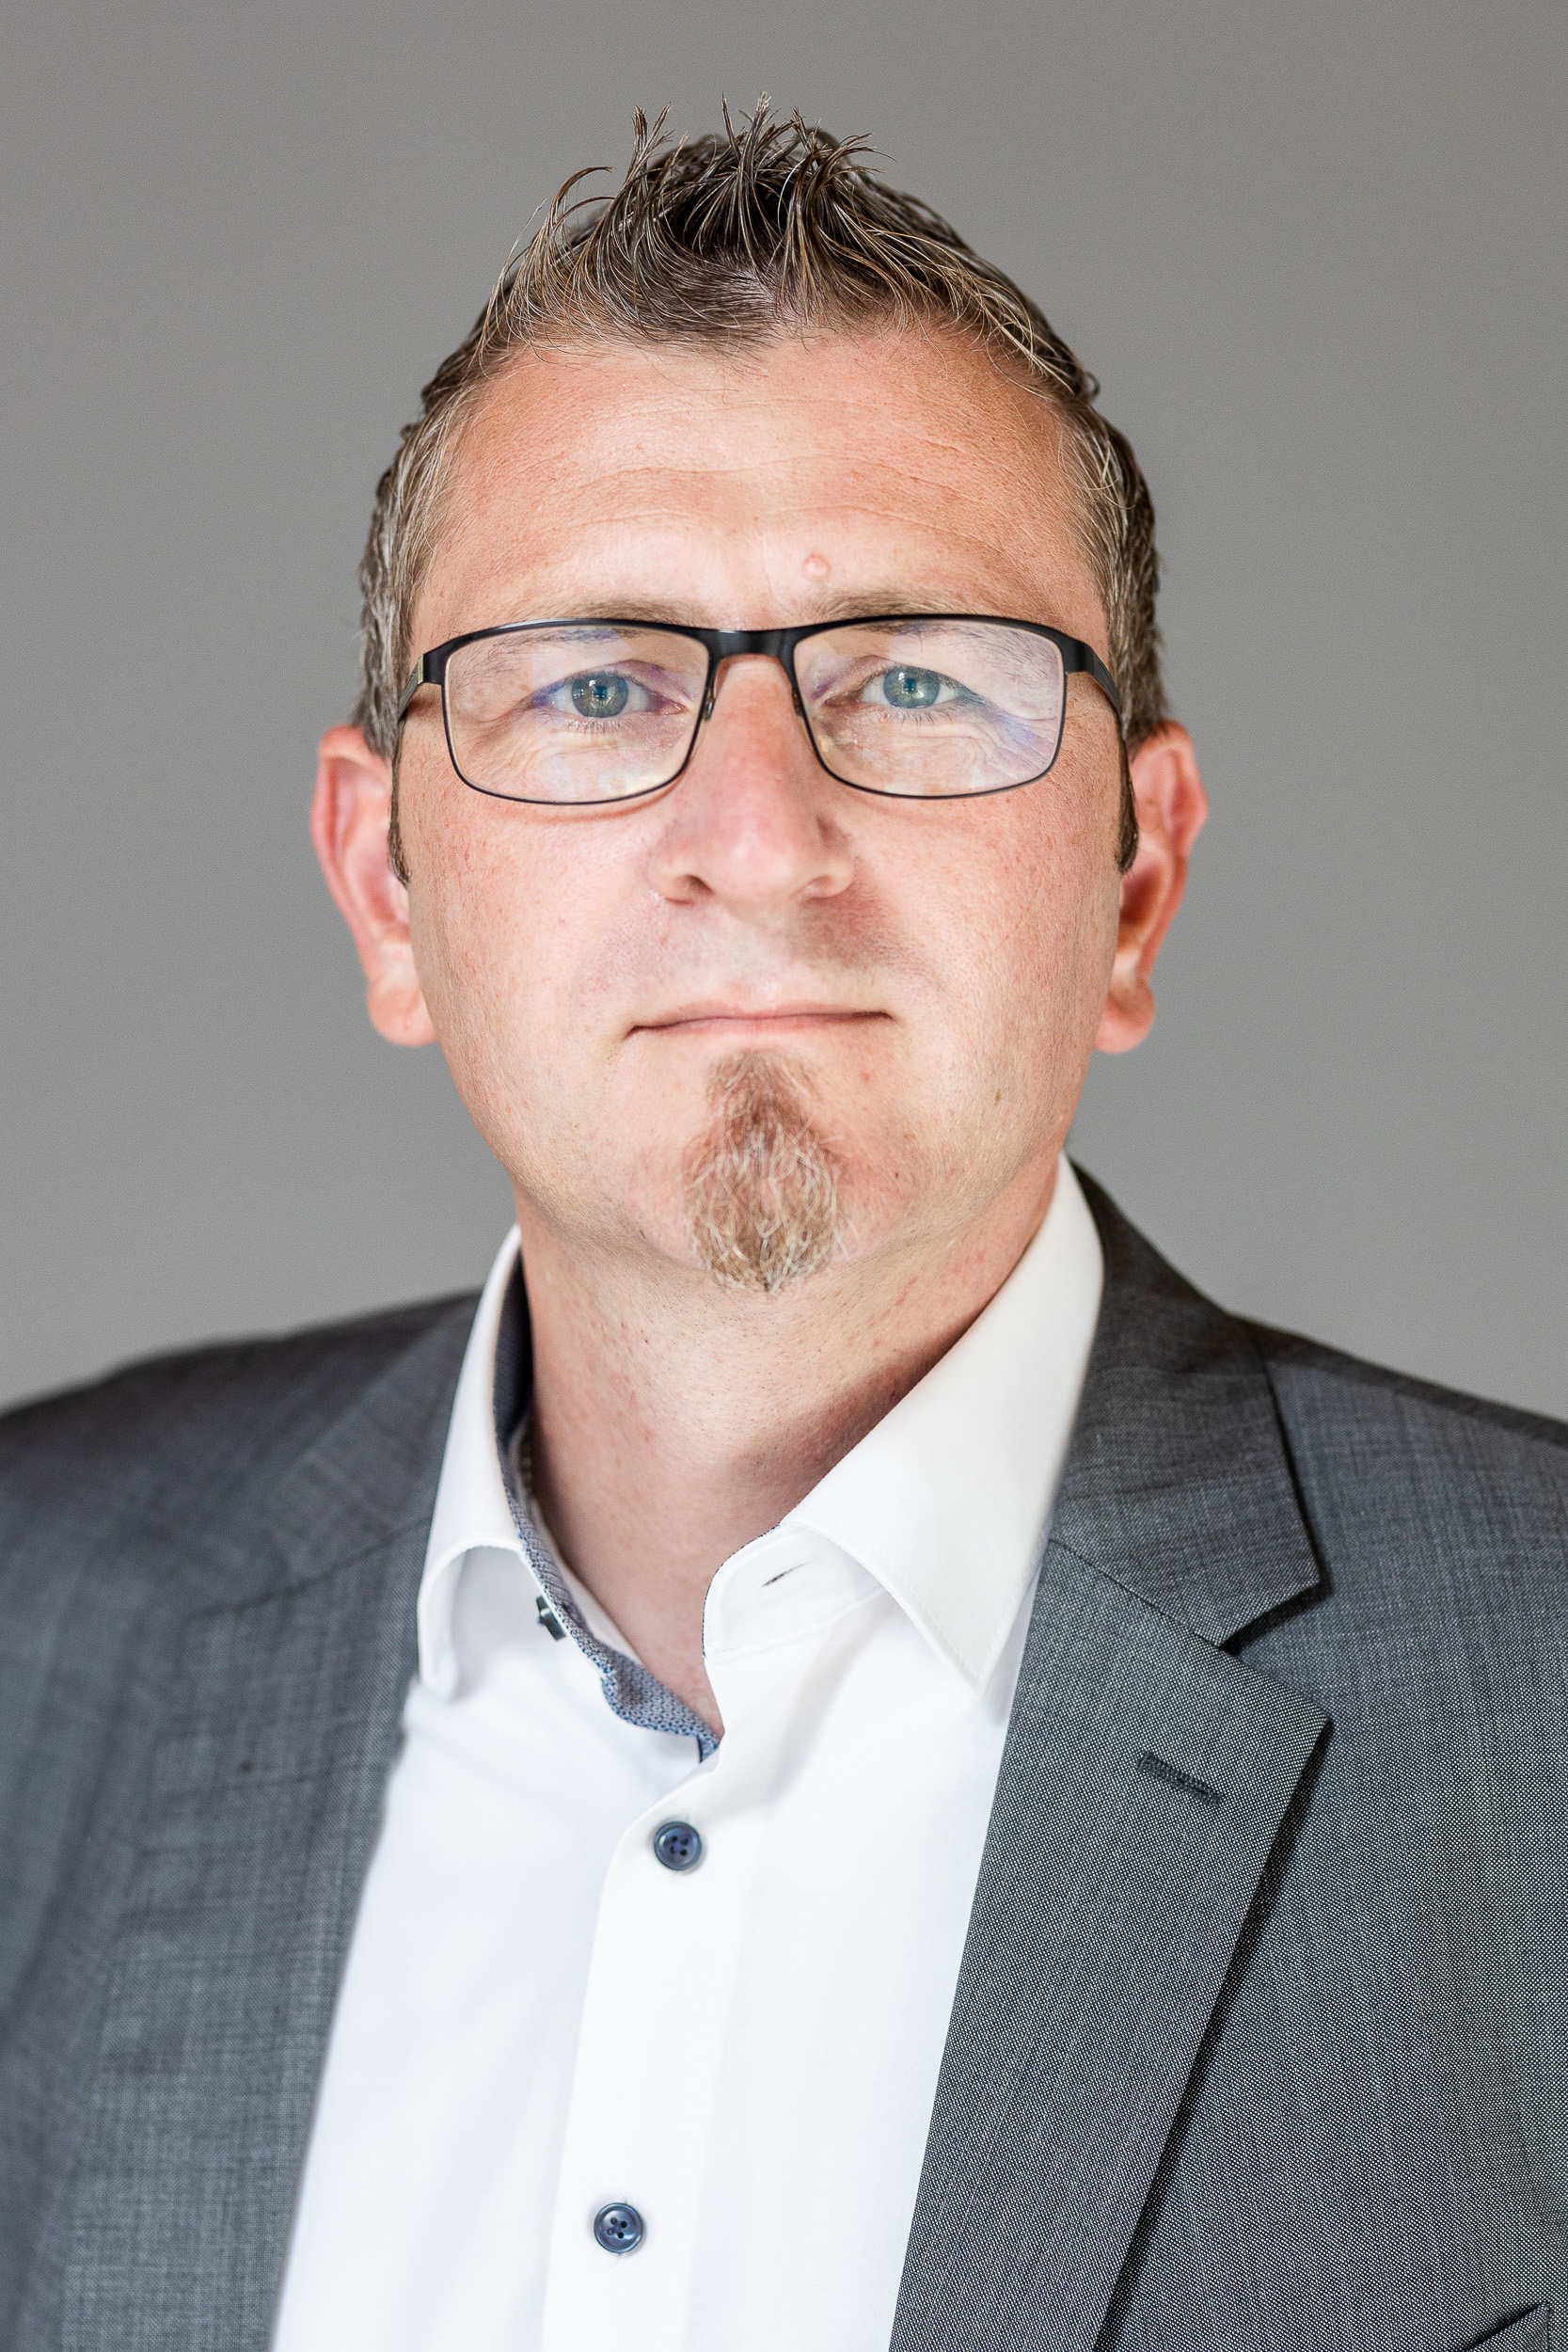 Christof Hunger, Head of Product Management in Hilscher